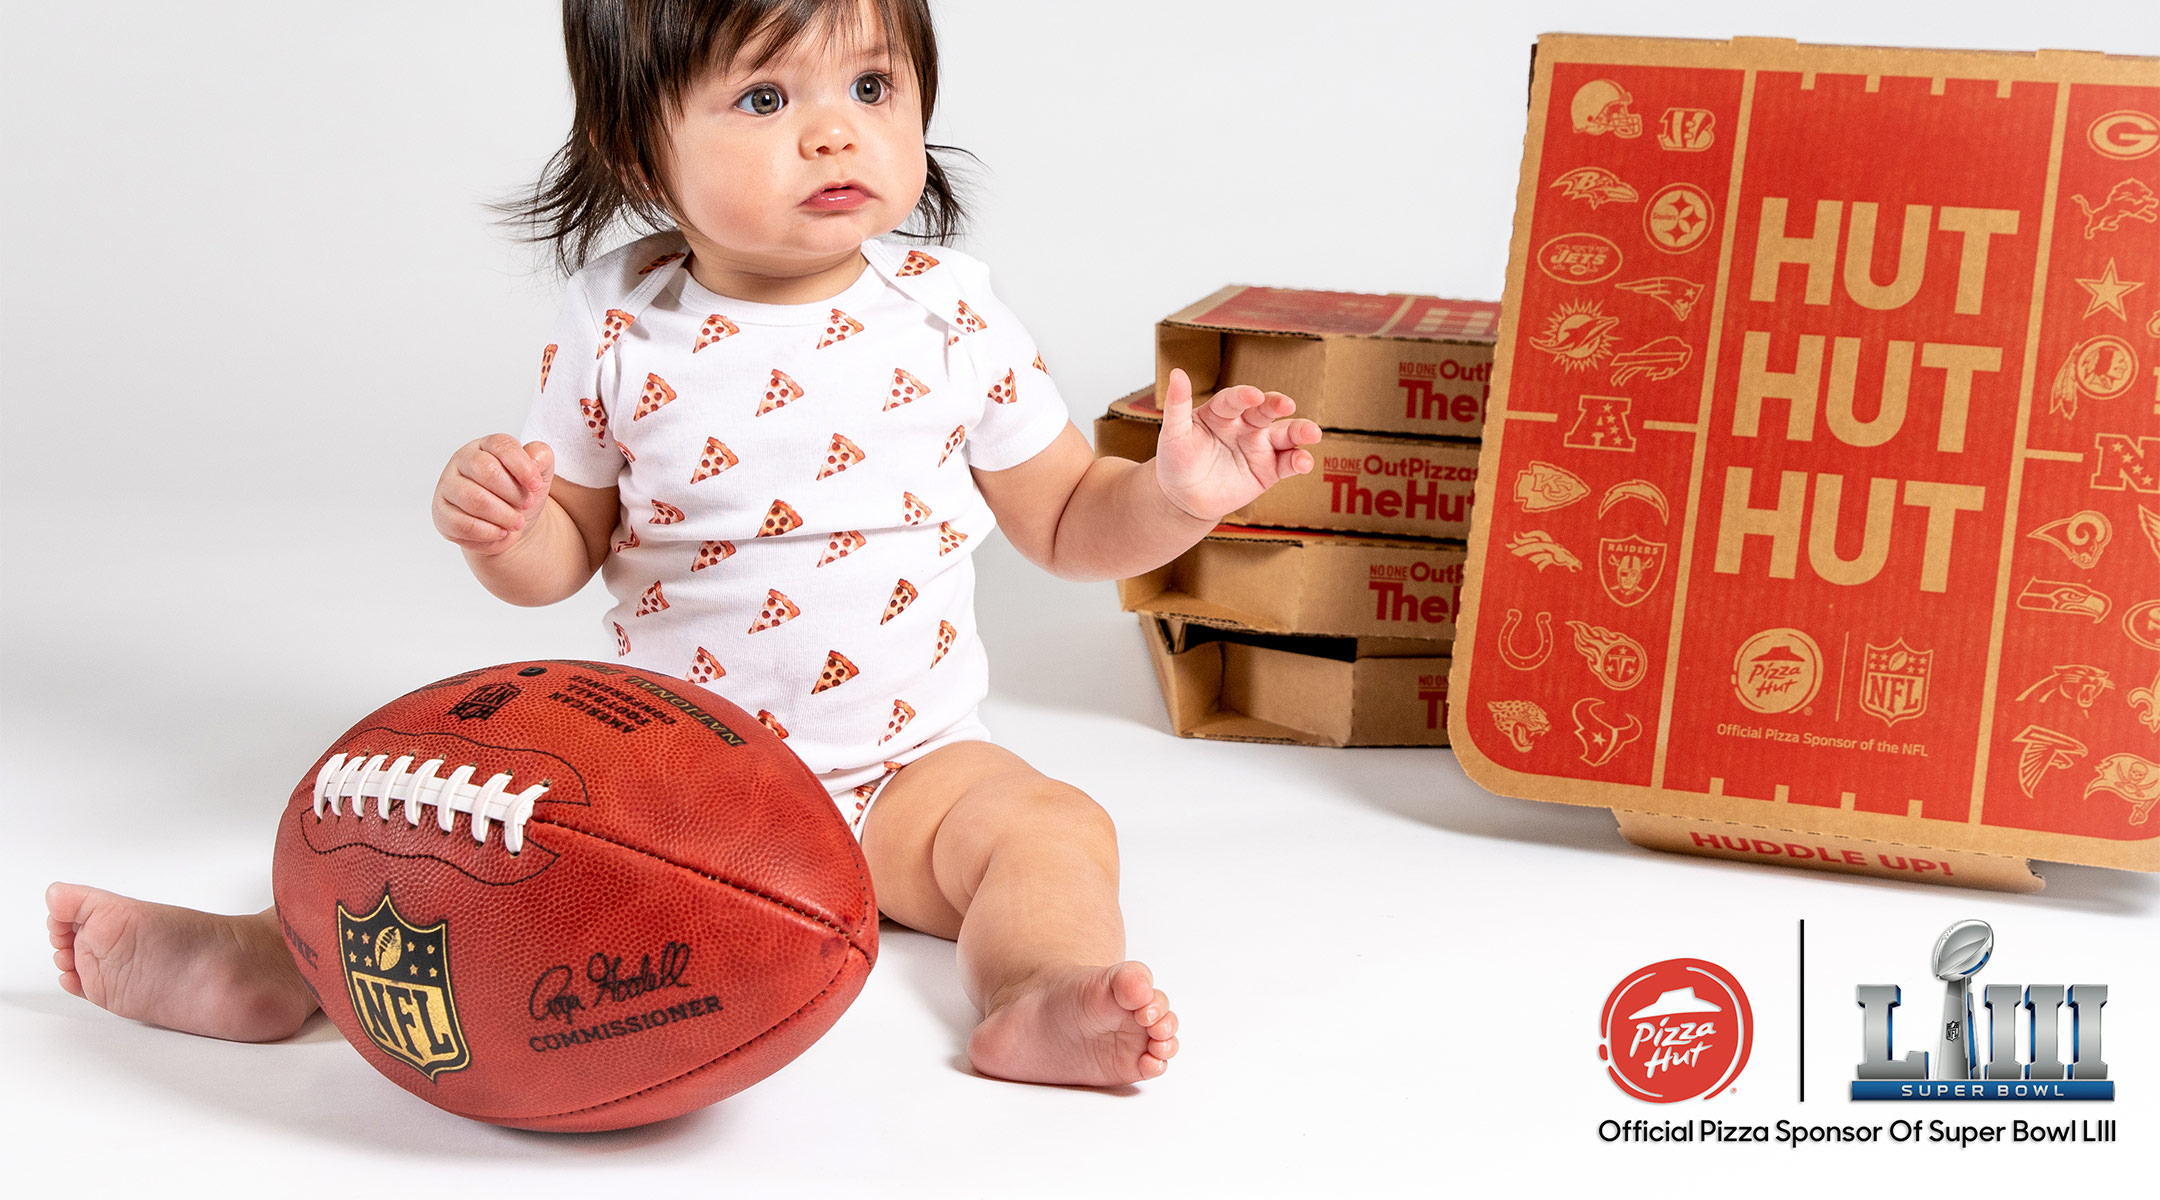 baby pictured with pizza hut boxes for deal pizza hut is offering, free pizza for one year first baby born after kick off